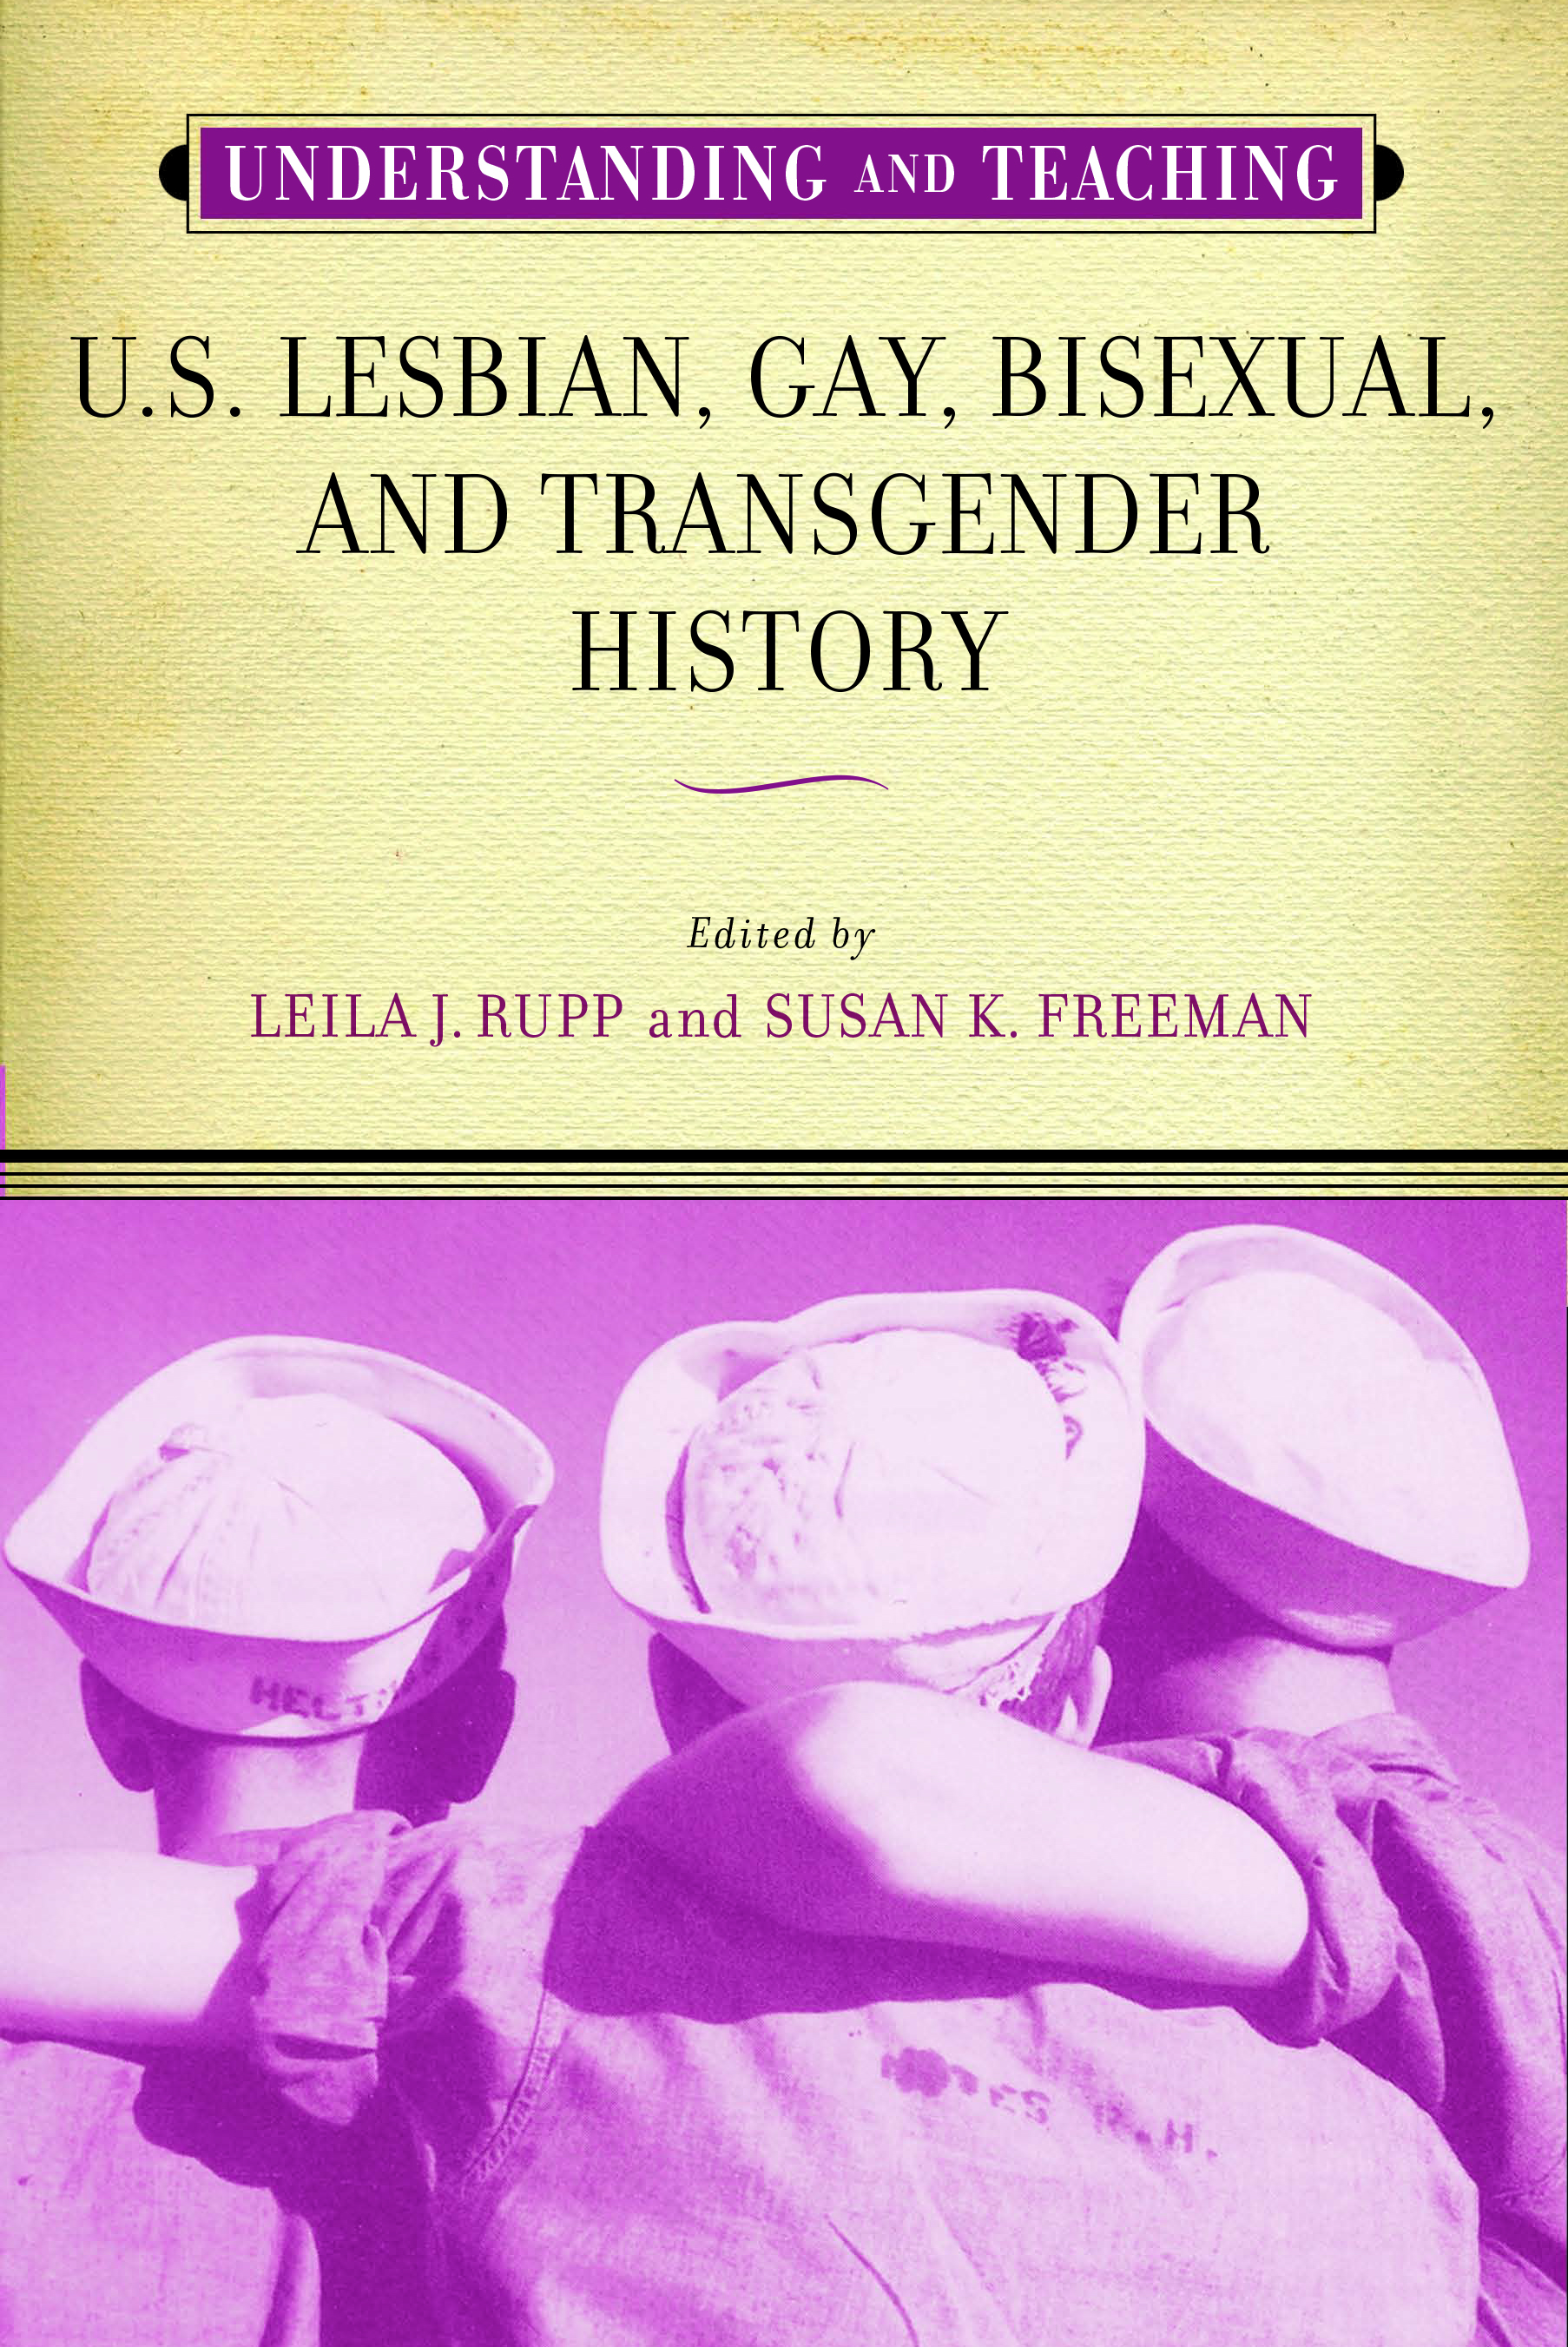 Understanding and Teaching U.S. Lesbian, Gay, Bisexual, and Transgender History [Book Chapter]